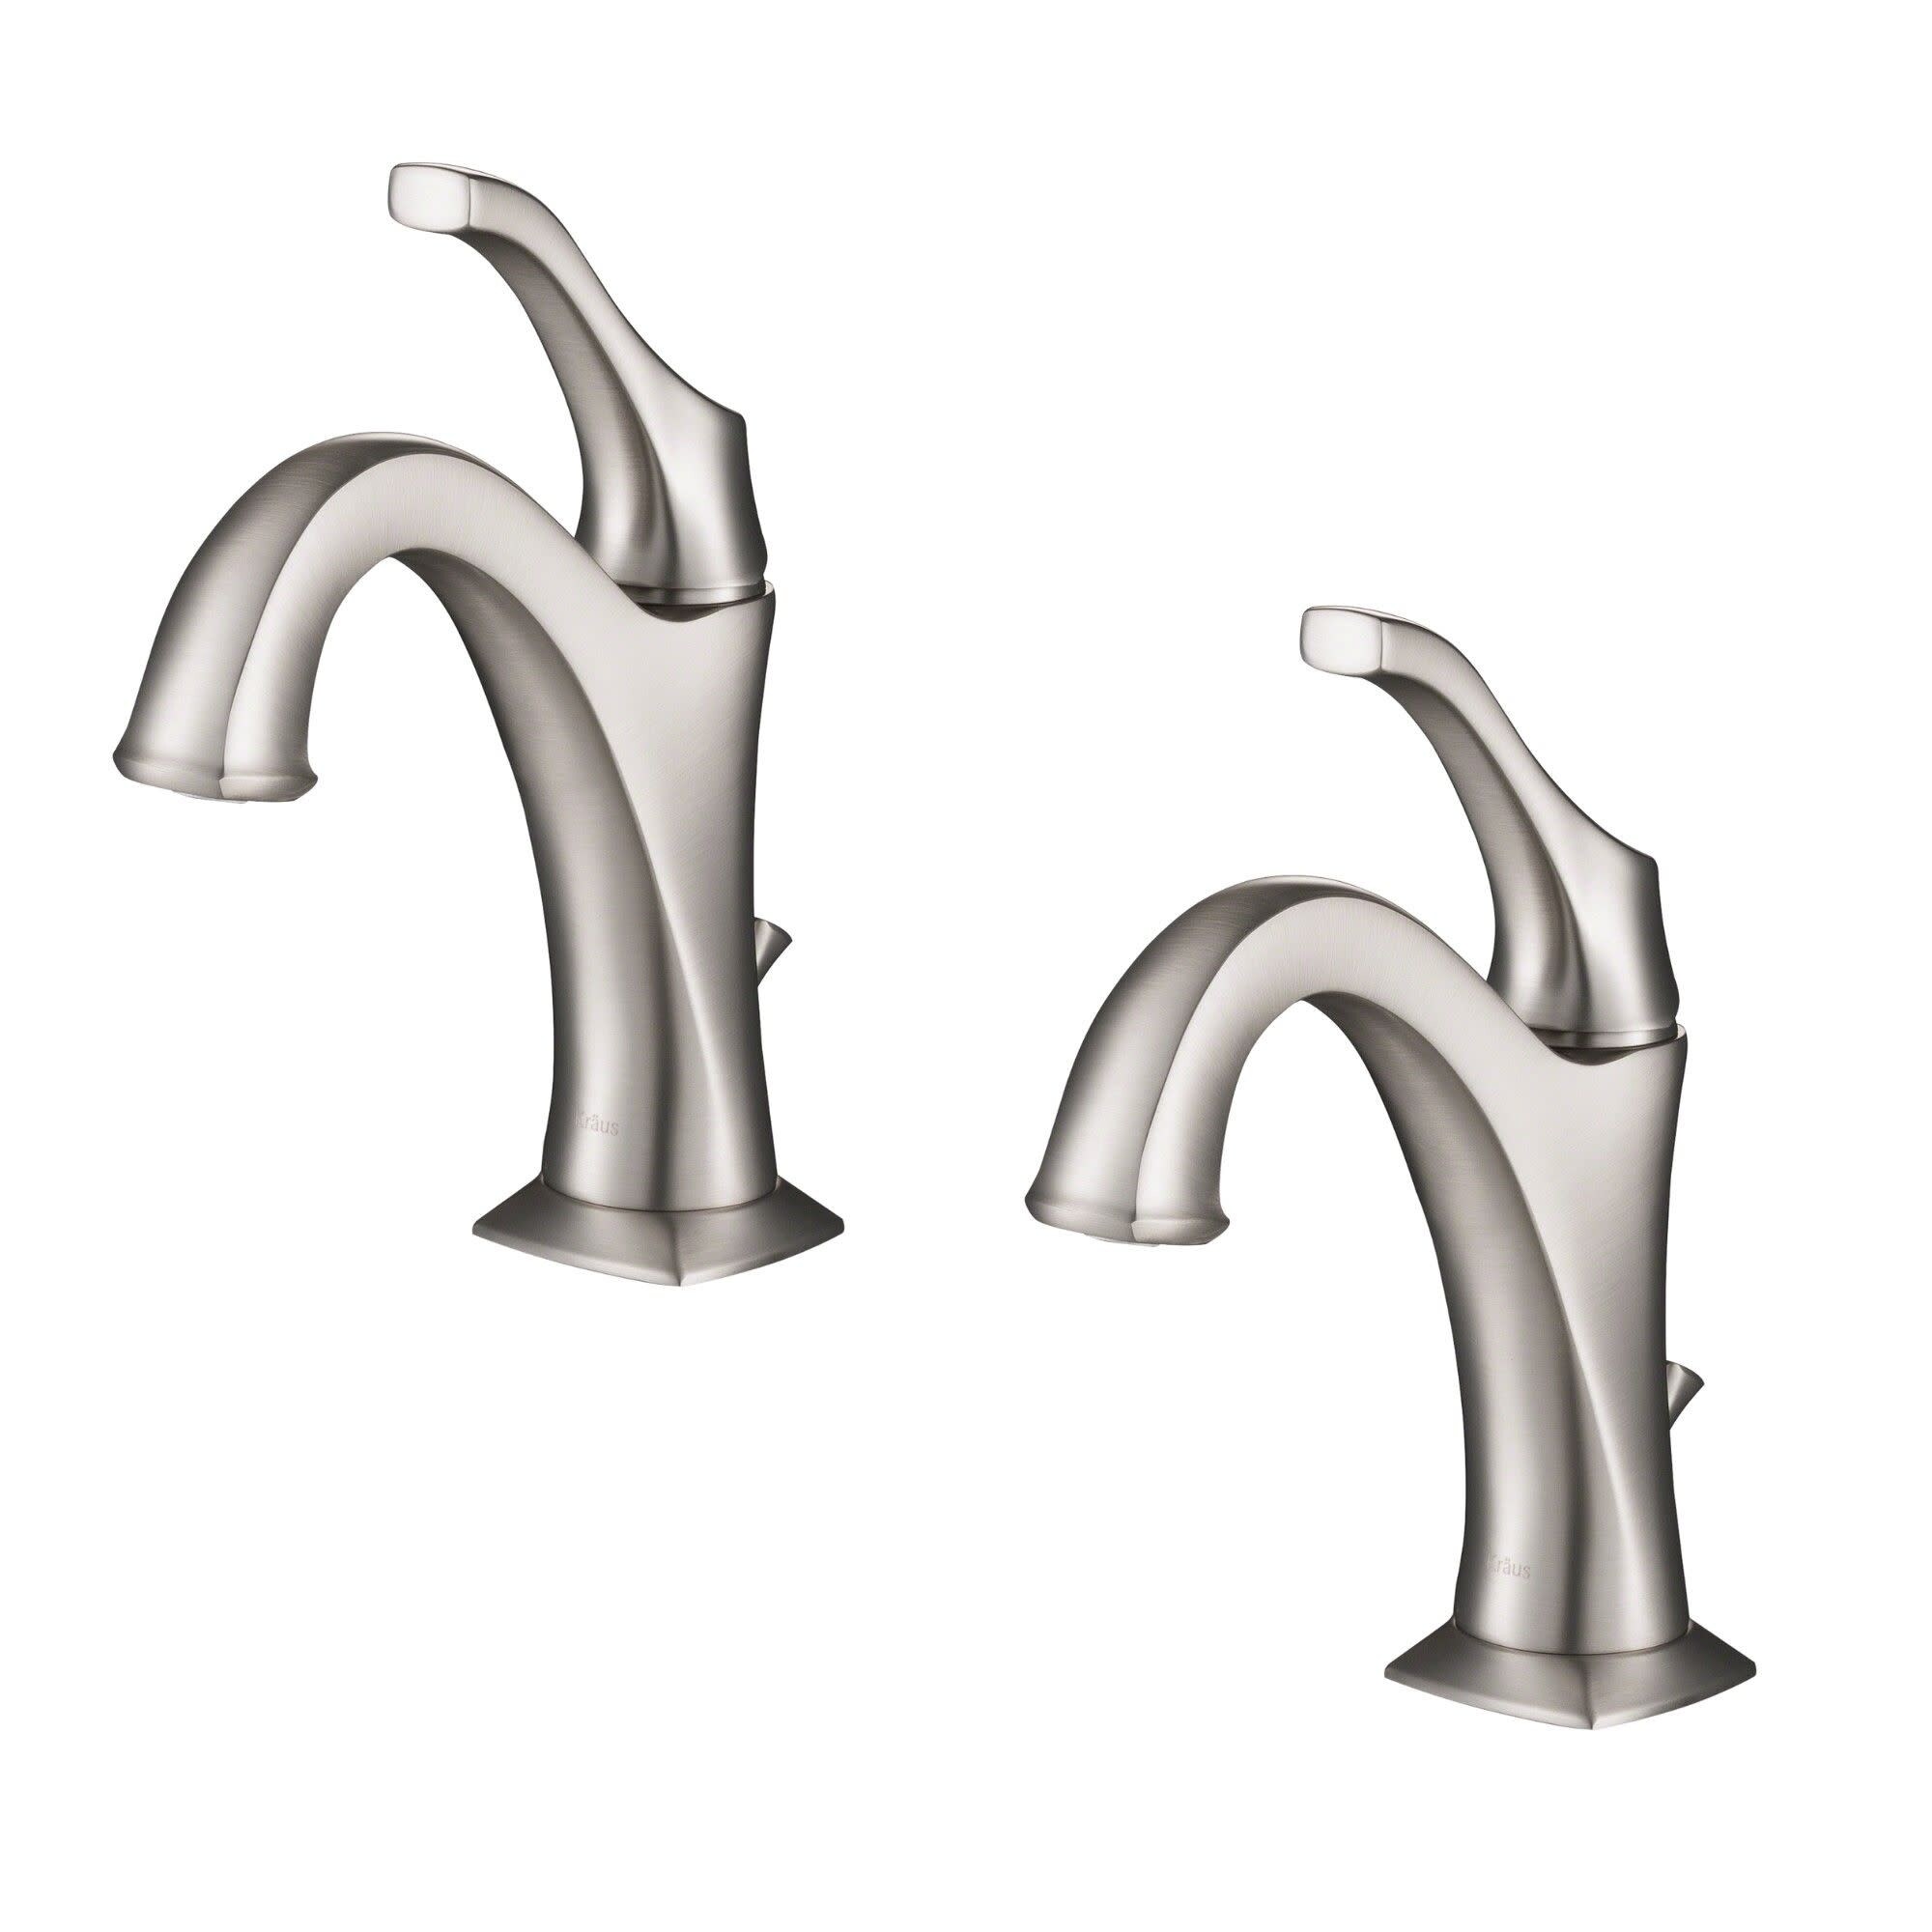 Kraus Pack of (2) Arlo 1.2 GPM Single Hole Bathroom Faucet with Pop-Up